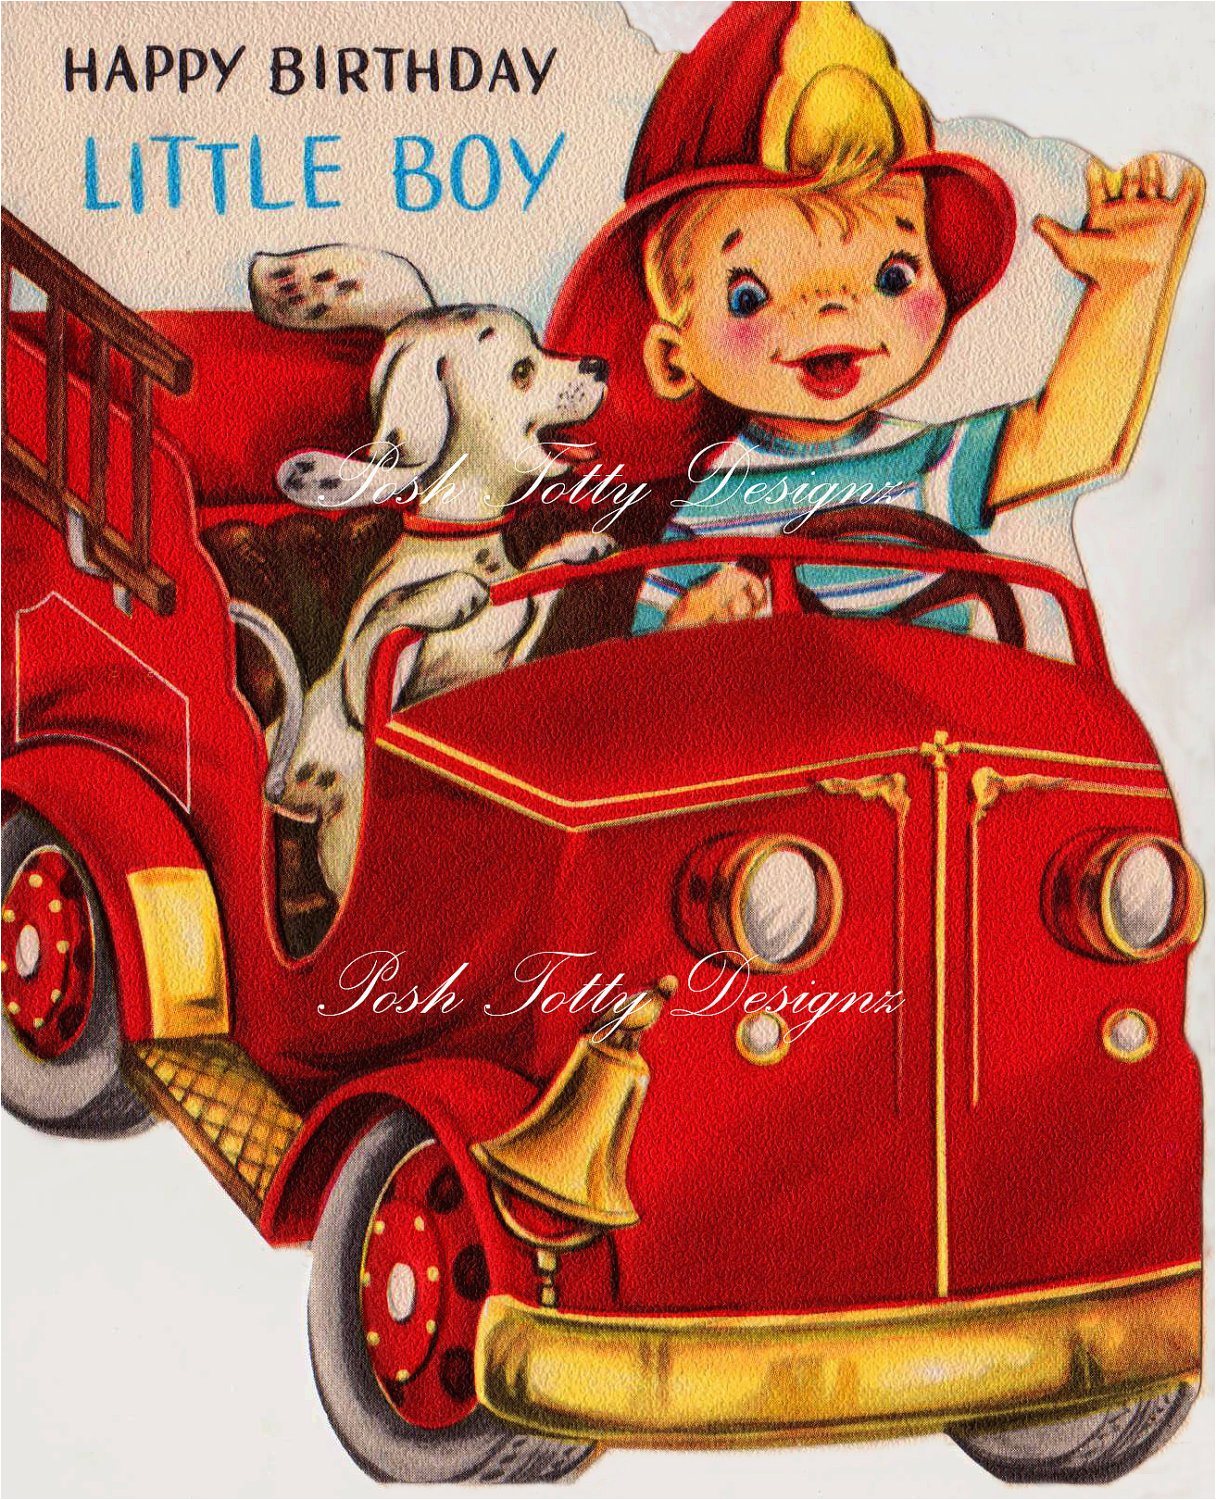 Birthday Cards for Little Boys 1950s Happy Birthday Little Boy Fire Chief Vintage Greetings